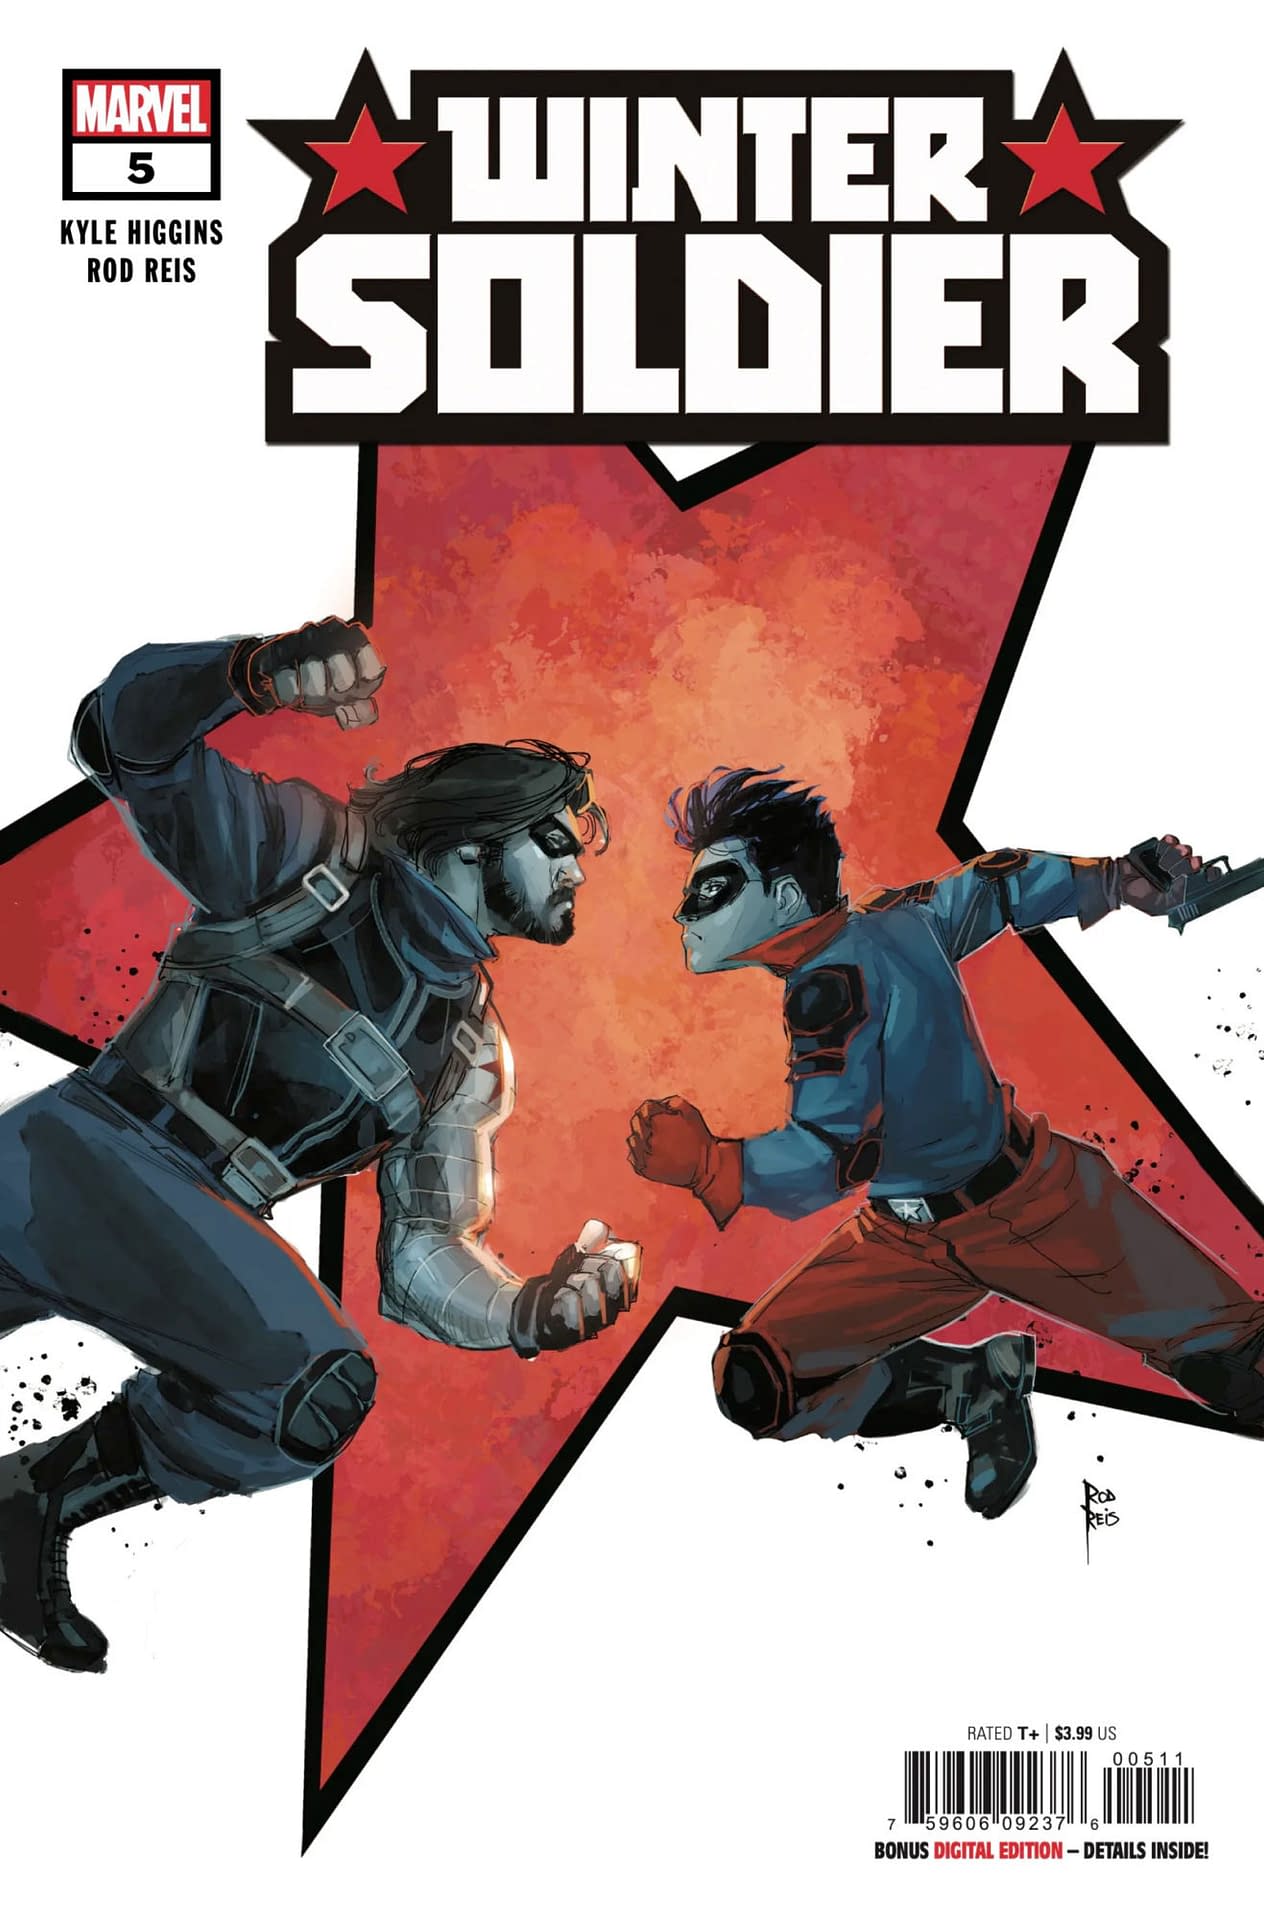 Has Bucky Barnes Turned to the Dark Side? Next Week's Winter Soldier #5